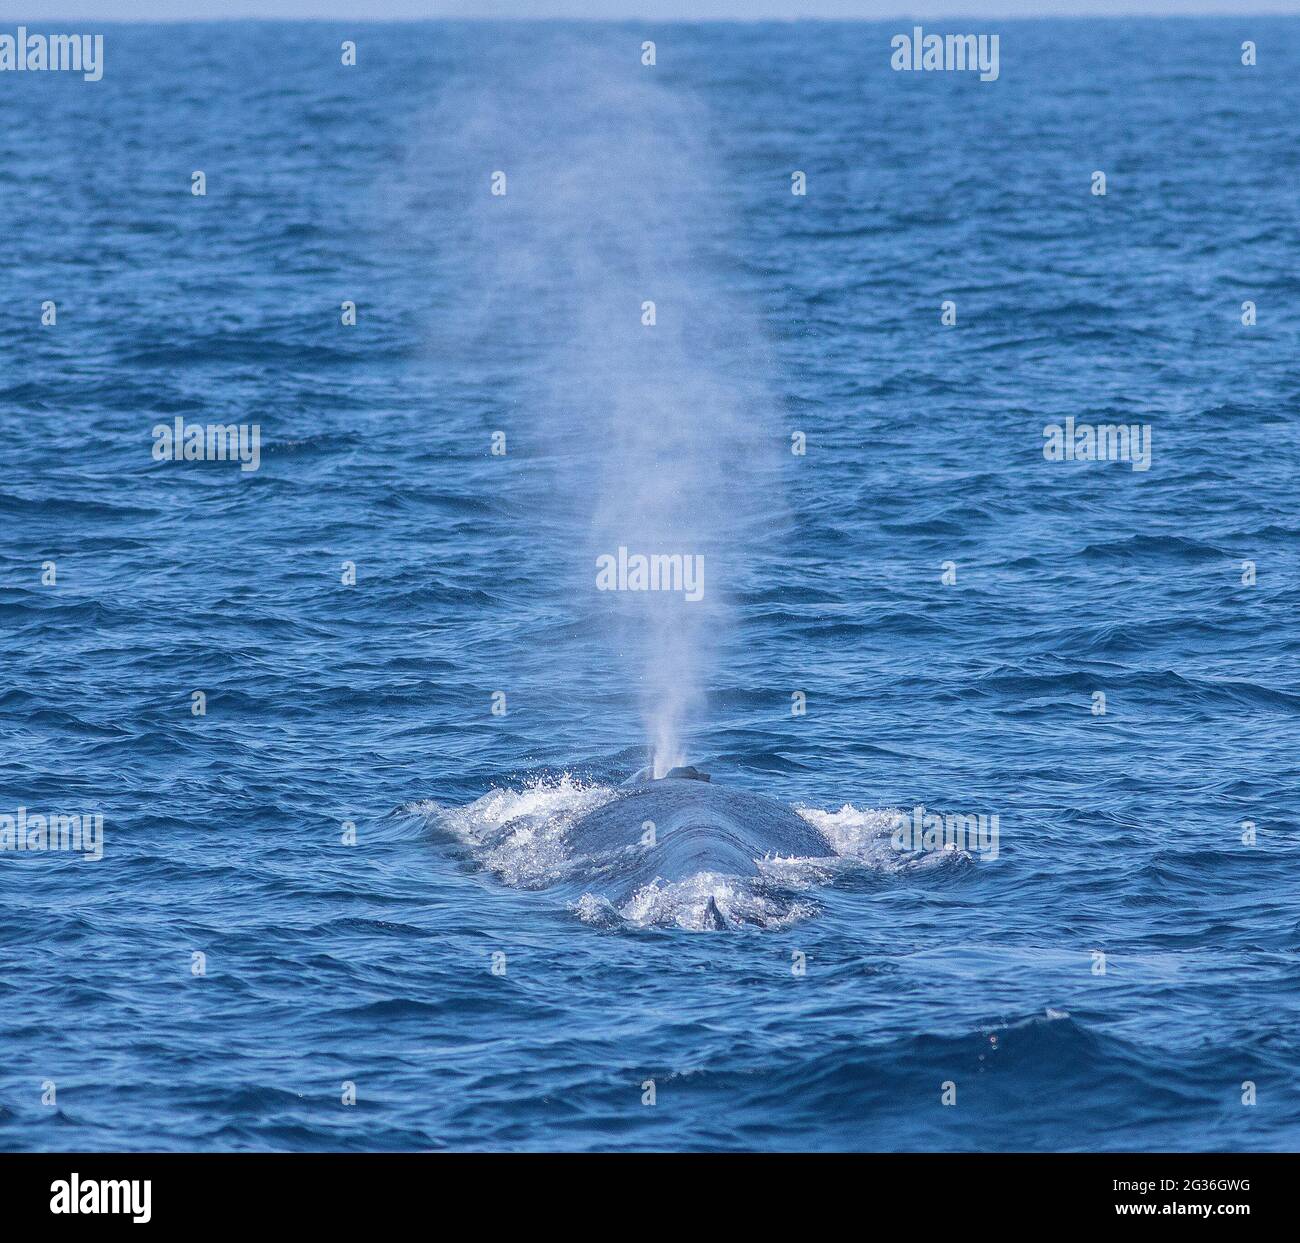 Blue whale blow hole; Blue whale blowing out water; whale spouting water from blow hole; whale blow hole; whale spraying water Stock Photo